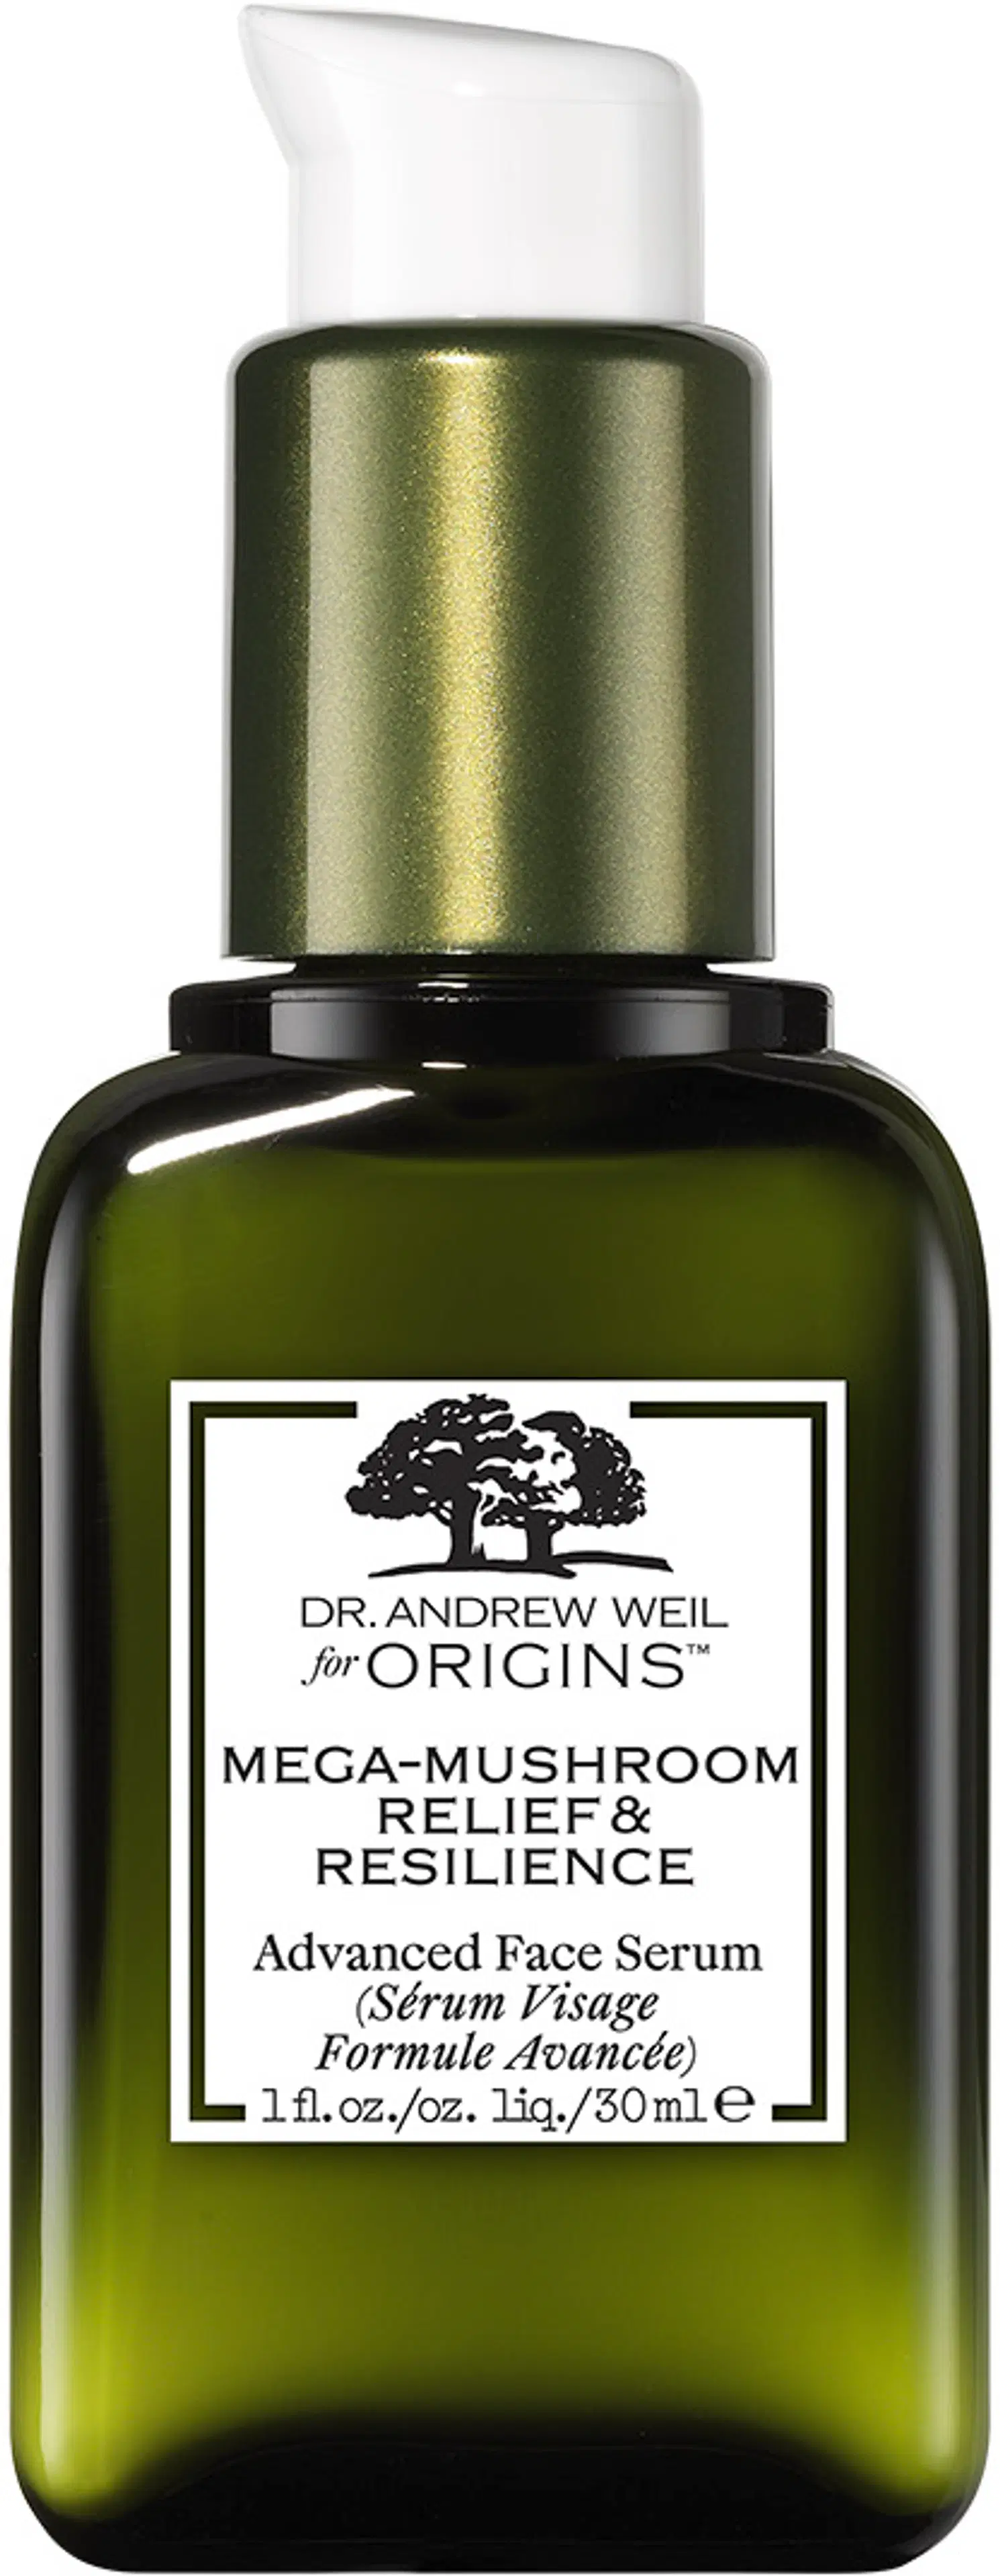 Dr. Andrew Weil for Origins Mega-Mushroom™ Relief & Resilience Advanced Face Seerumi 30 ml